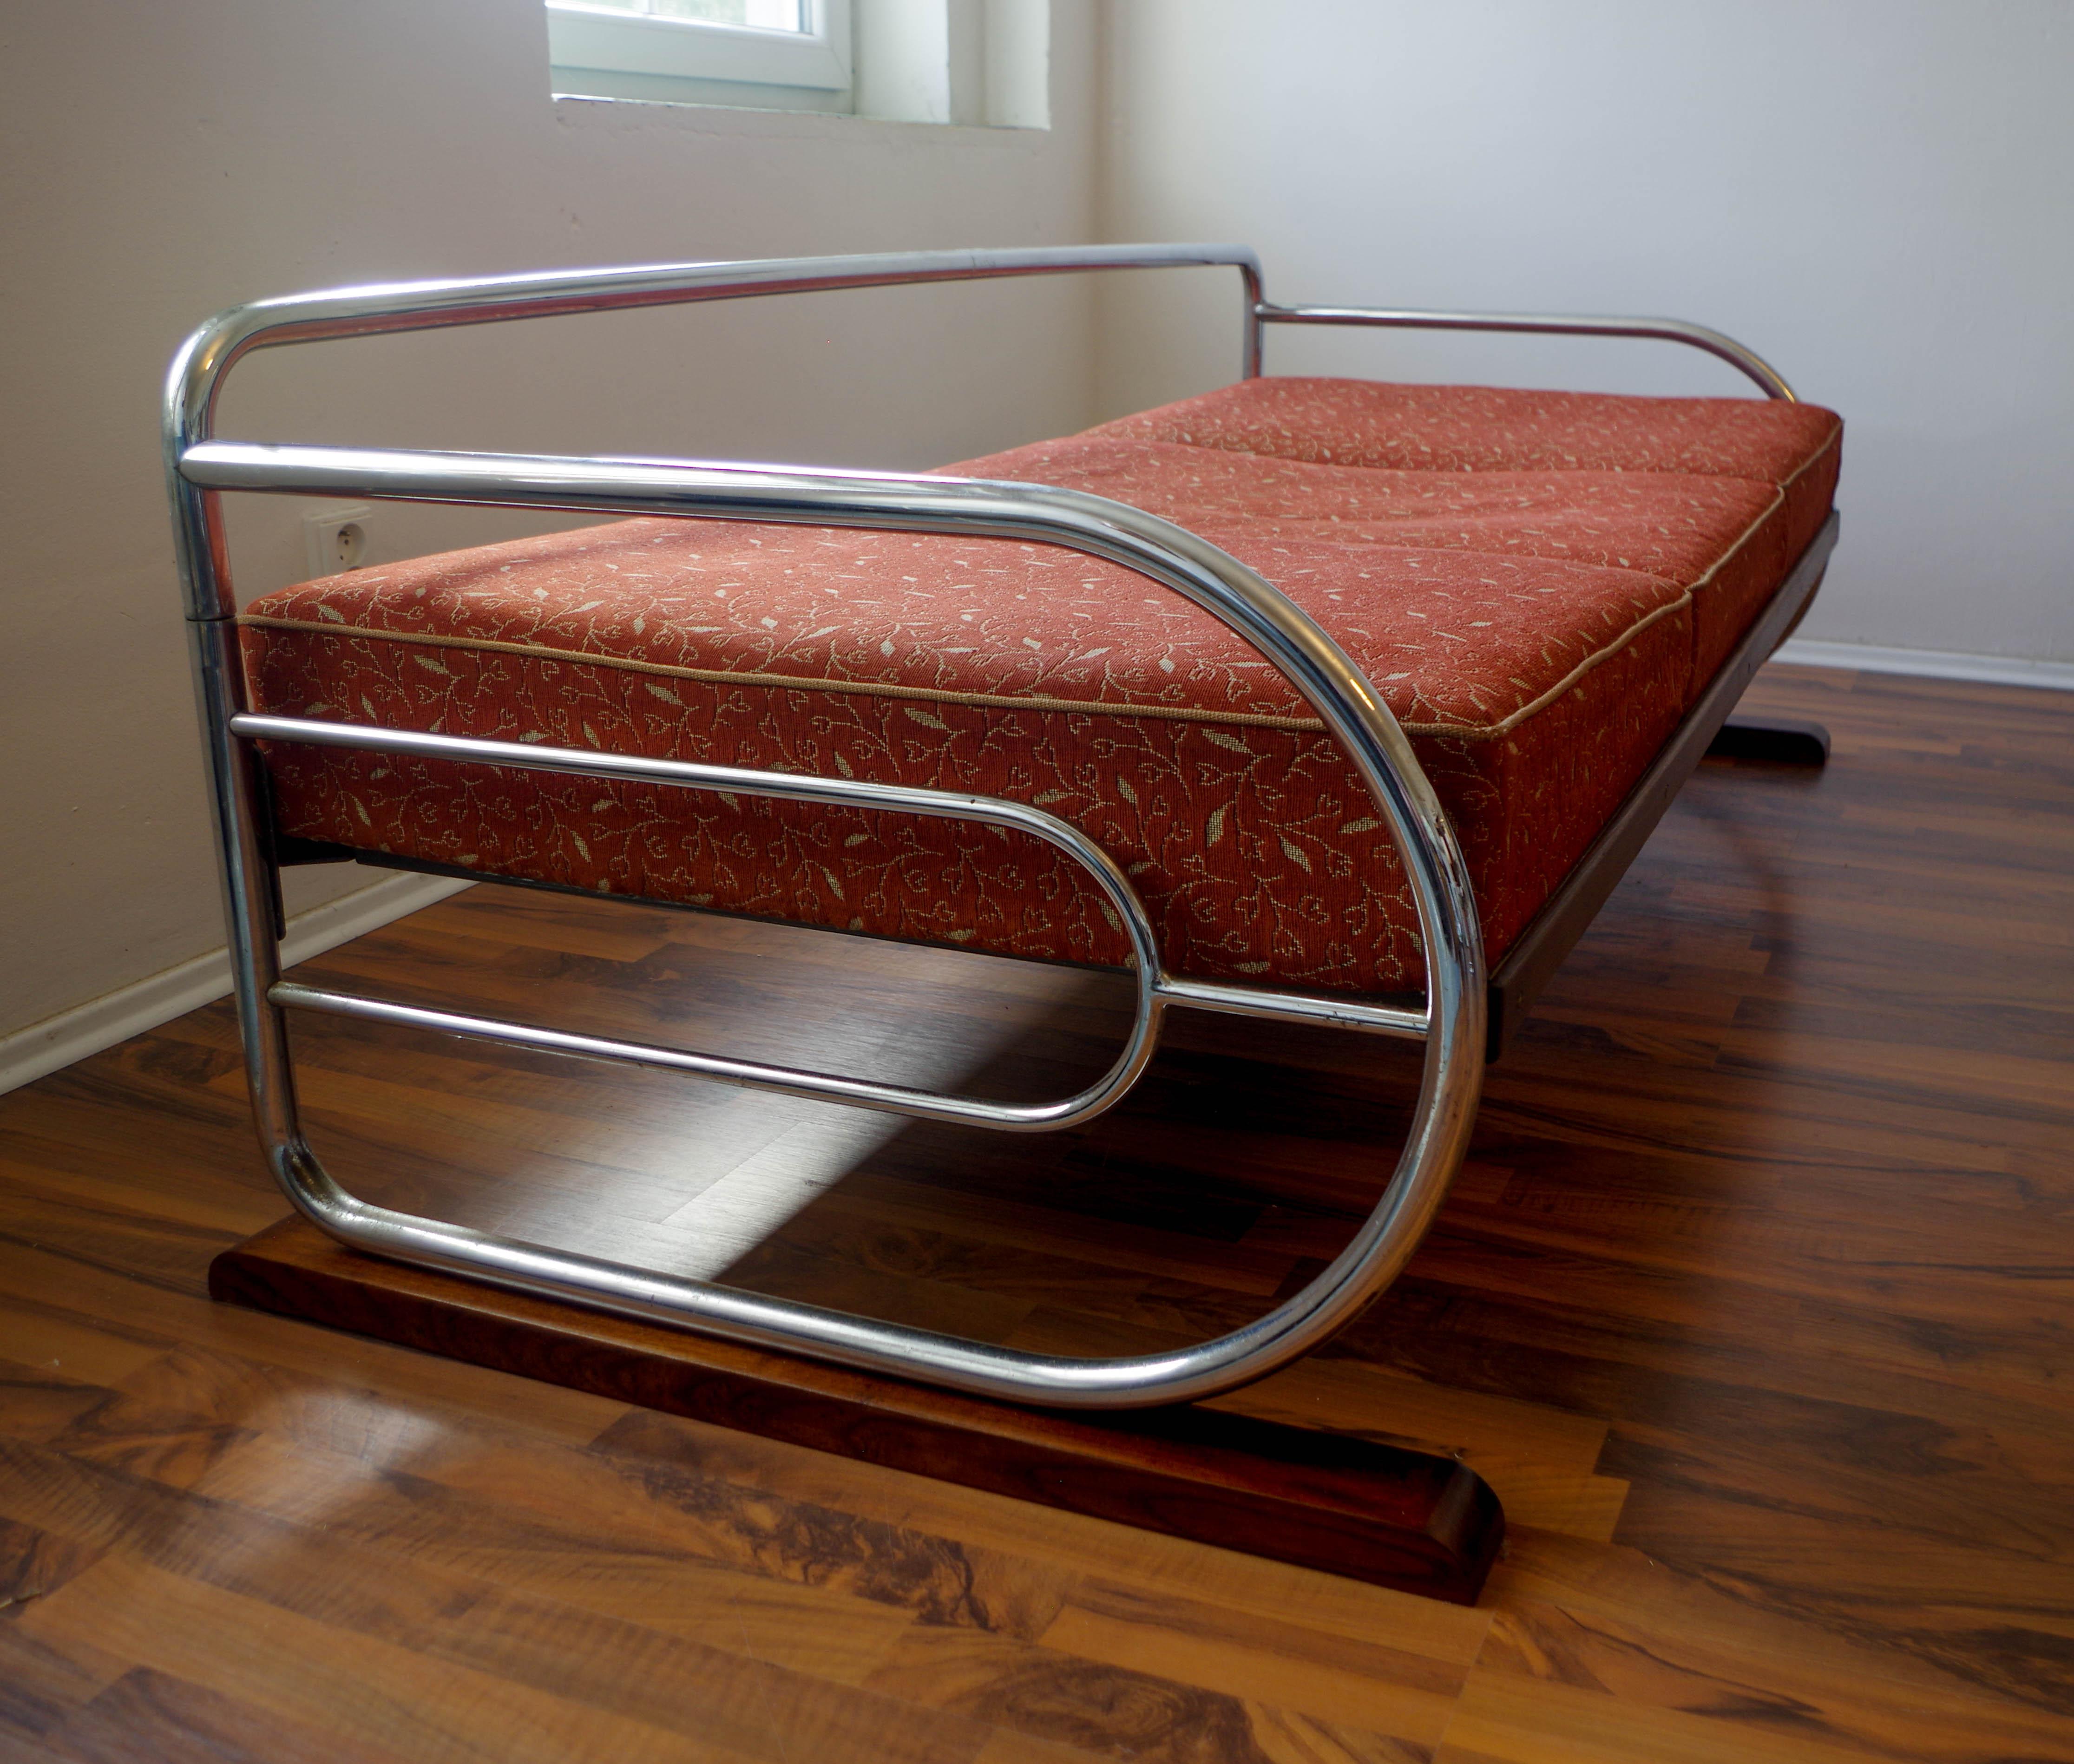 Very well preserved Bauhaus tubular sofa made by Slezak in 1930s.
Cushions in very good condition, very well preserved, no sun fading.
Chrome with minor age patina - polished.
Wooden part refinished.
Shipping quote on request.